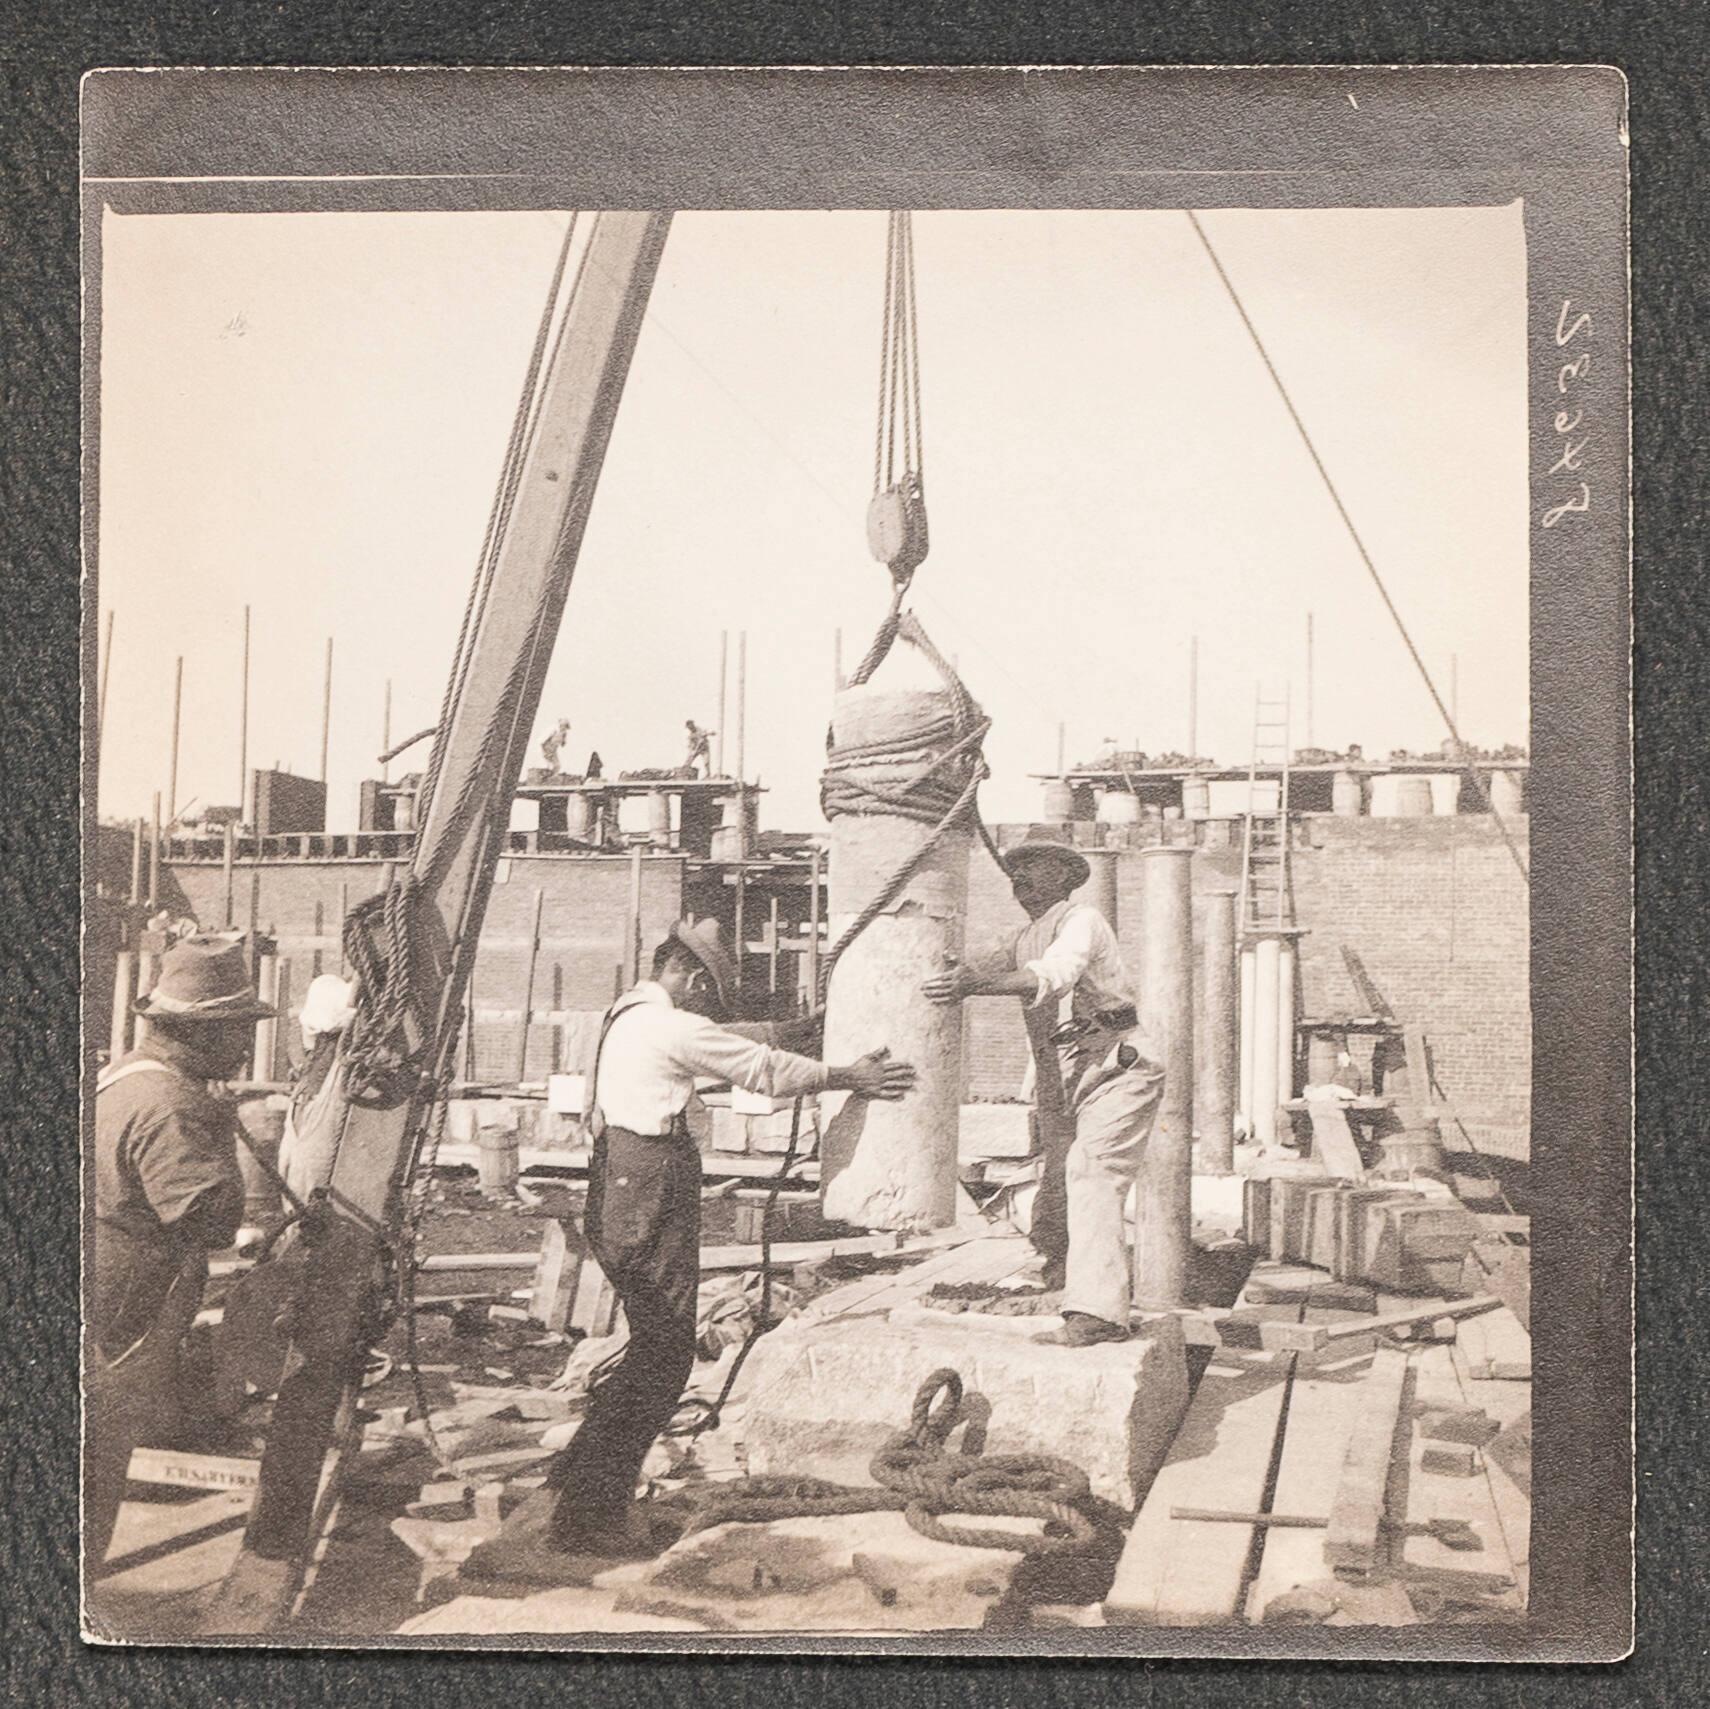 A black and white photograph showing three men on the Gardner Museum construction site with two of the men at the center holding a pillar that is suspended in the air with rope on a crane.